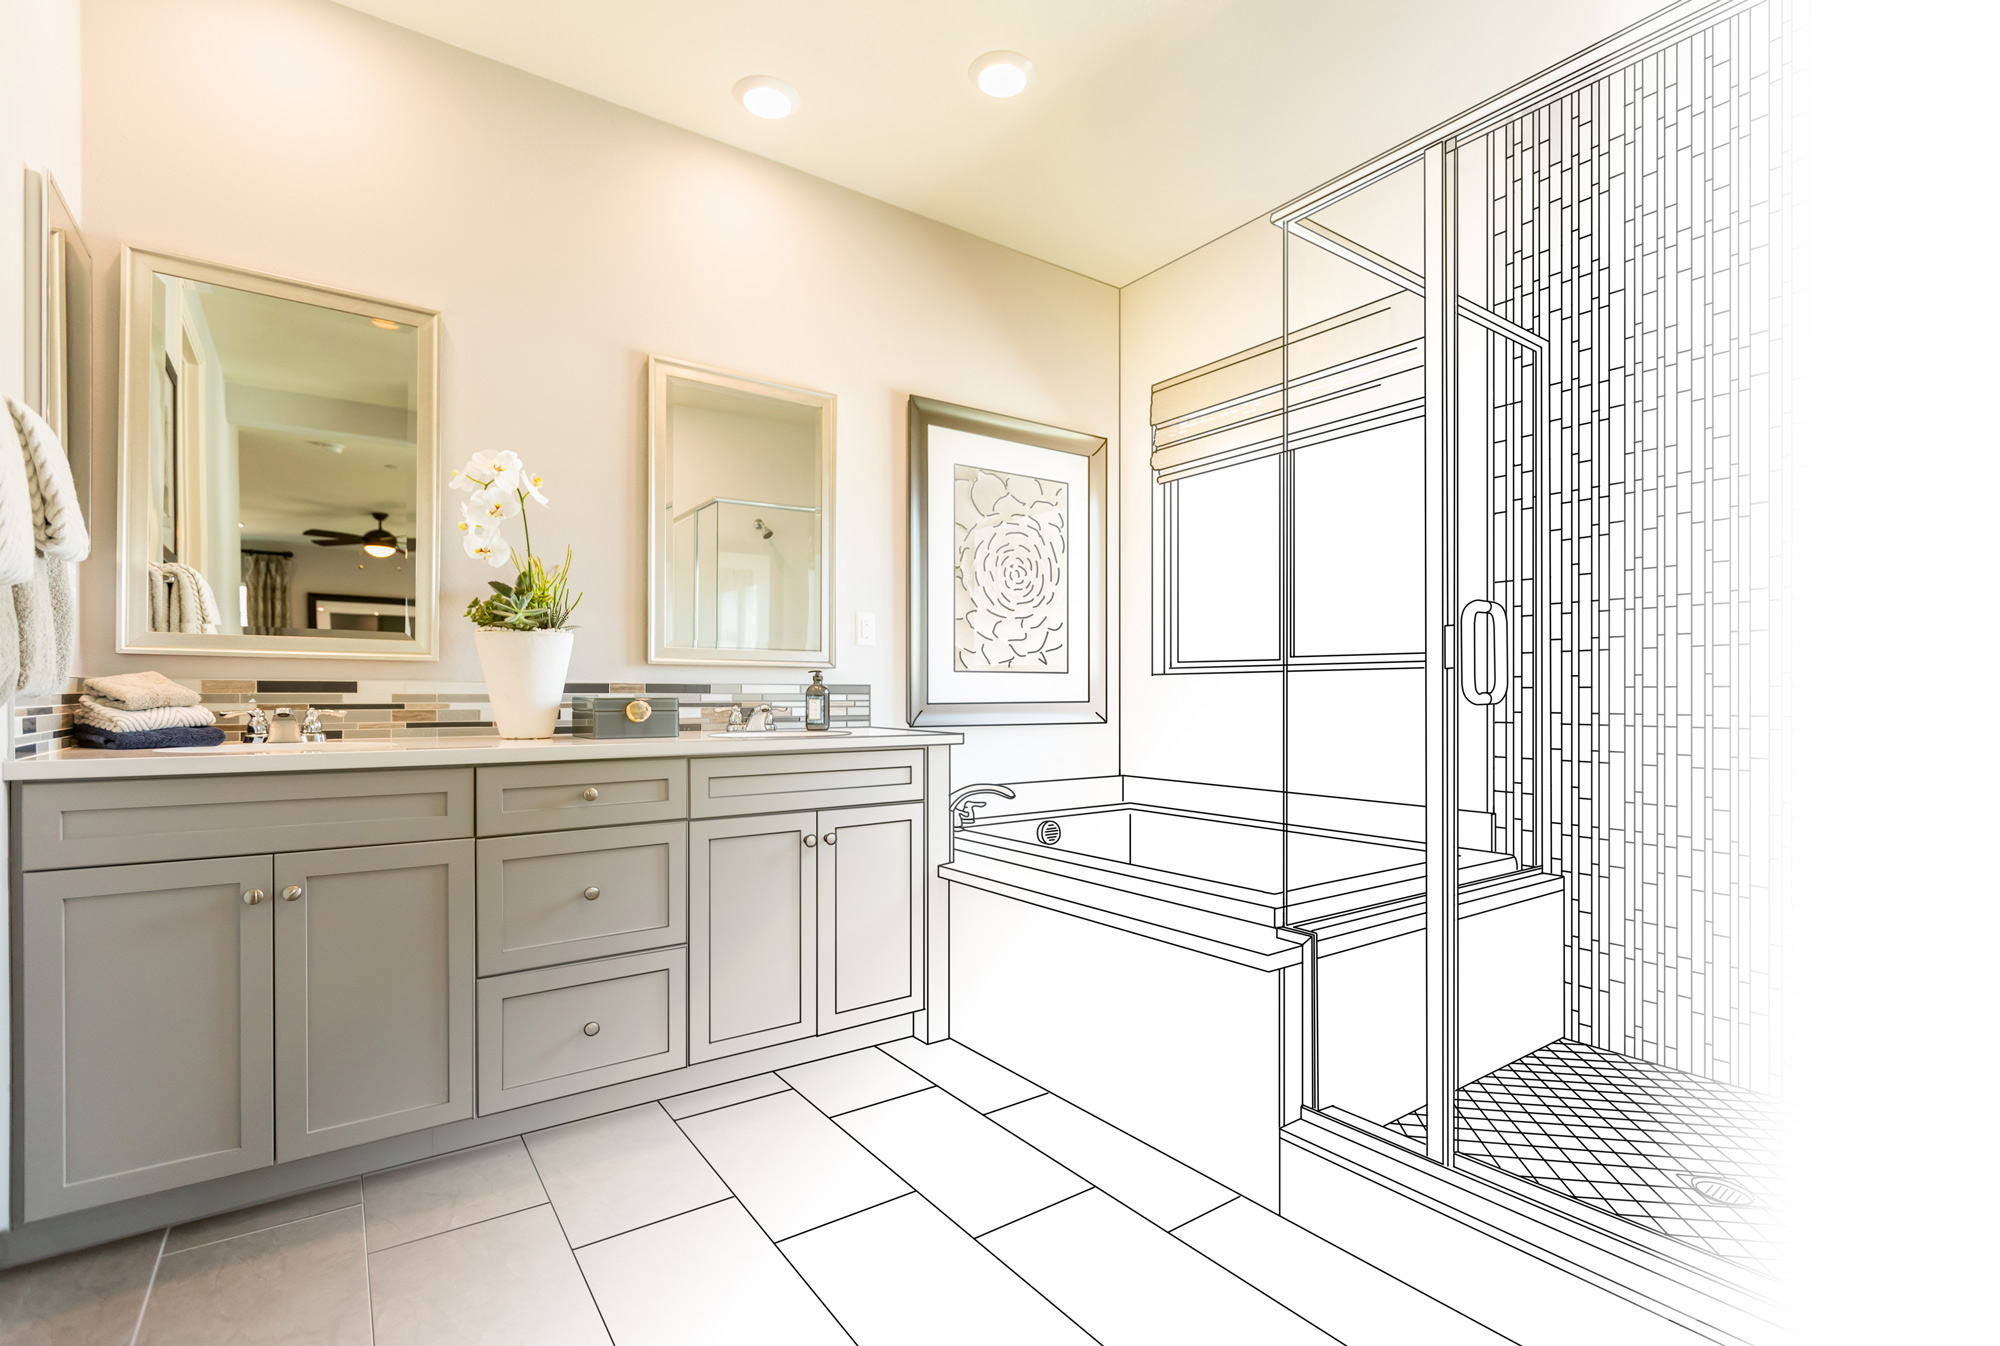 12 Ideas to Remodel a Bathroom on a Budget